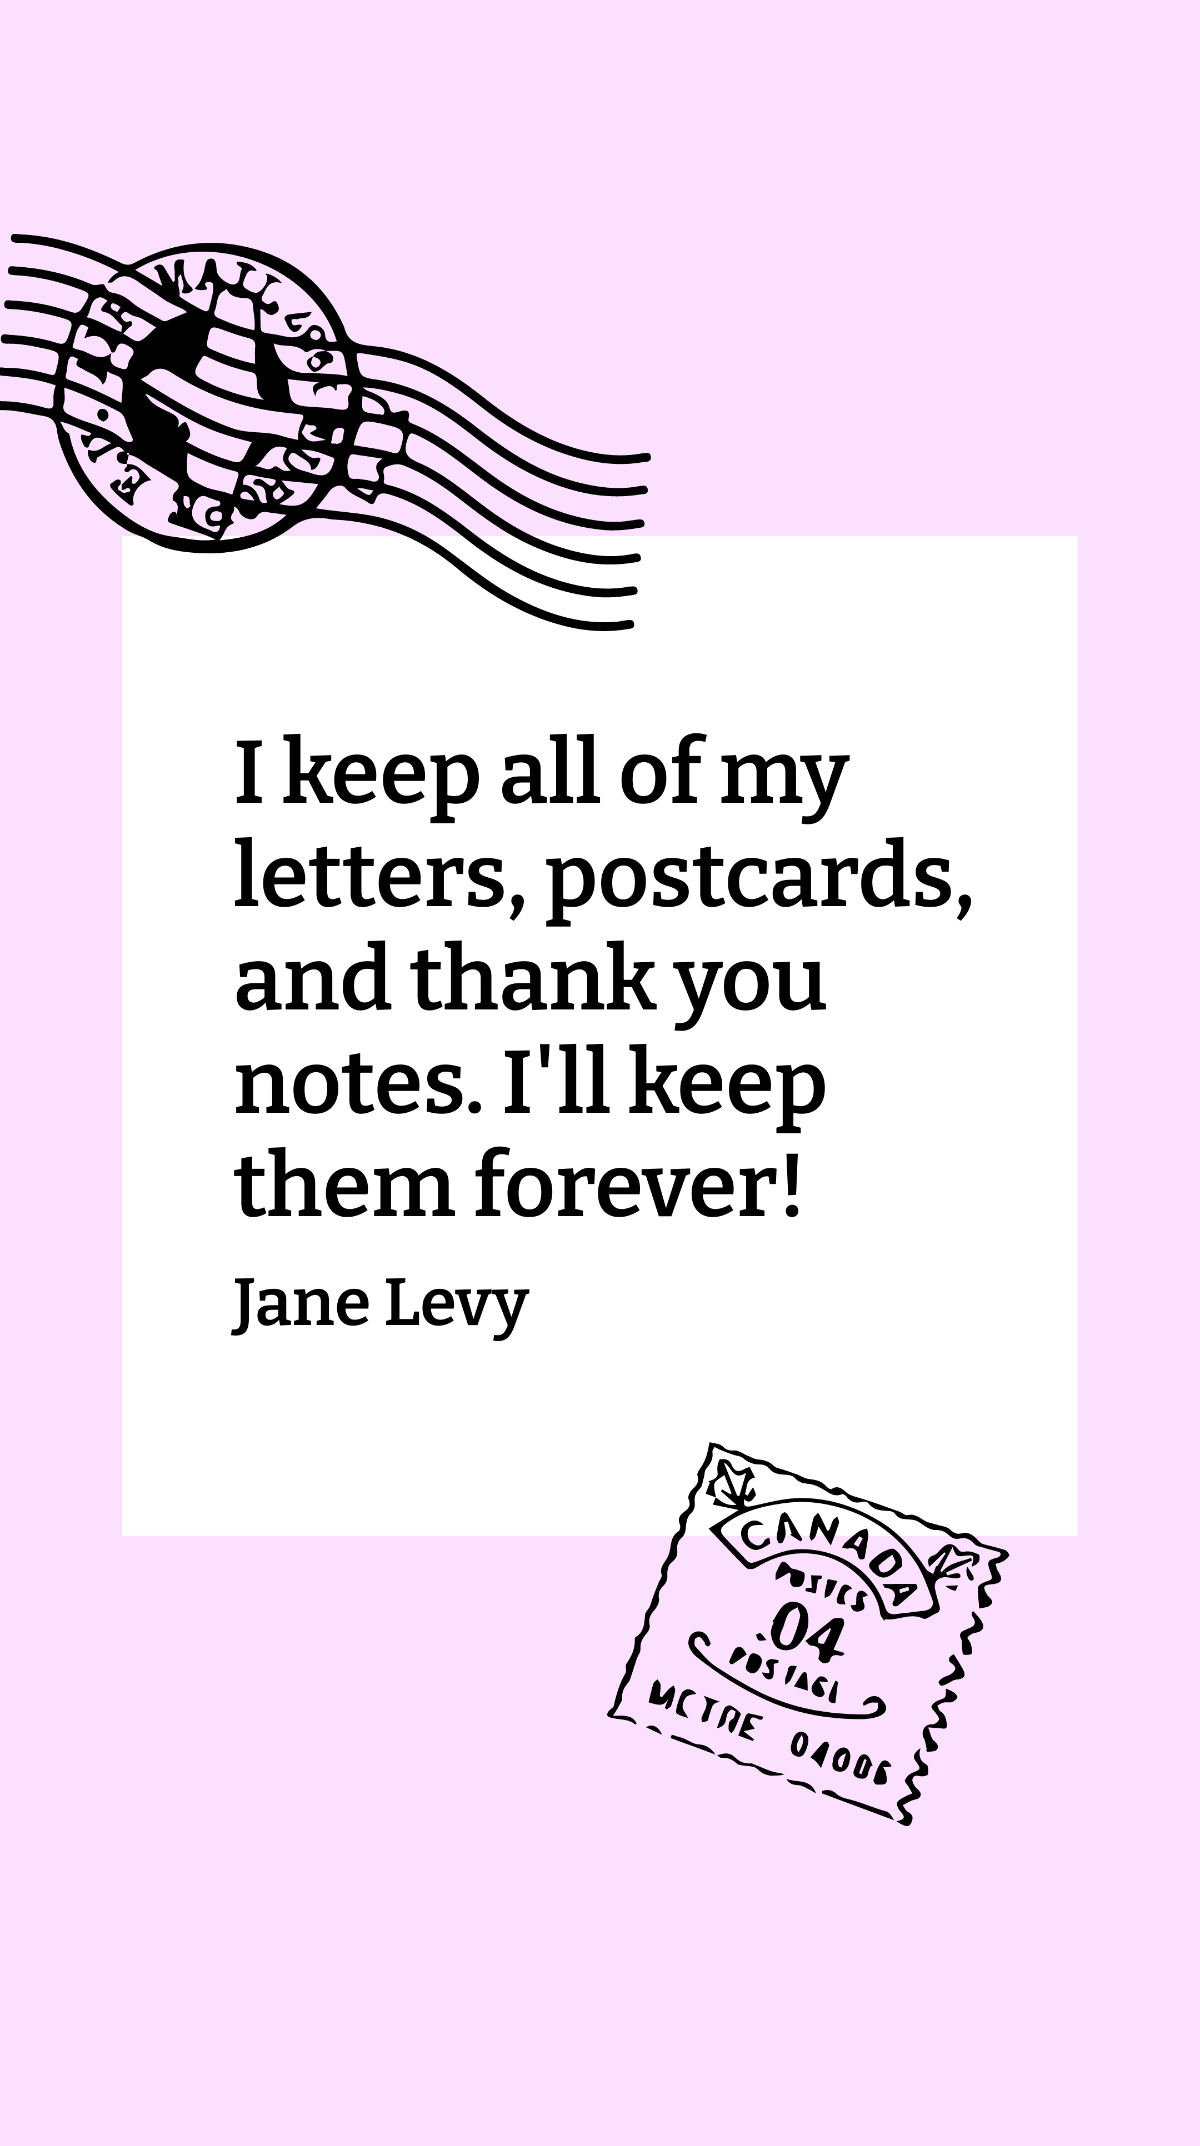 Free Jane Levy - I keep all of my letters, postcards, and thank you notes. I'll keep them forever! Template